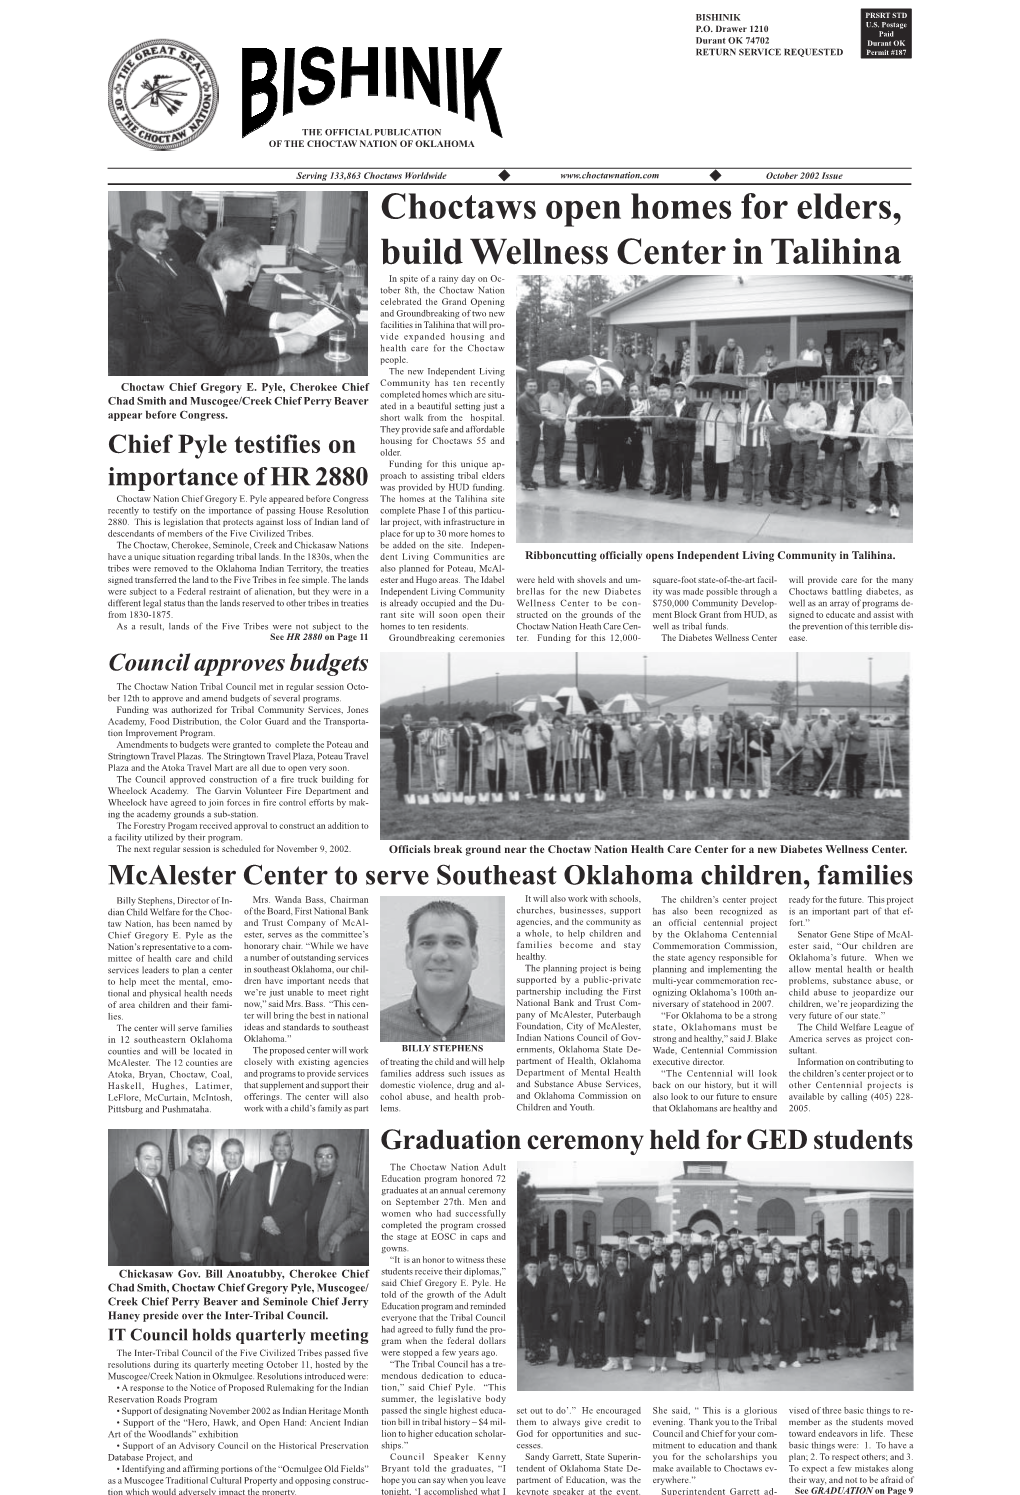 Choctaws Open Homes for Elders, Build Wellness Center in Talihina